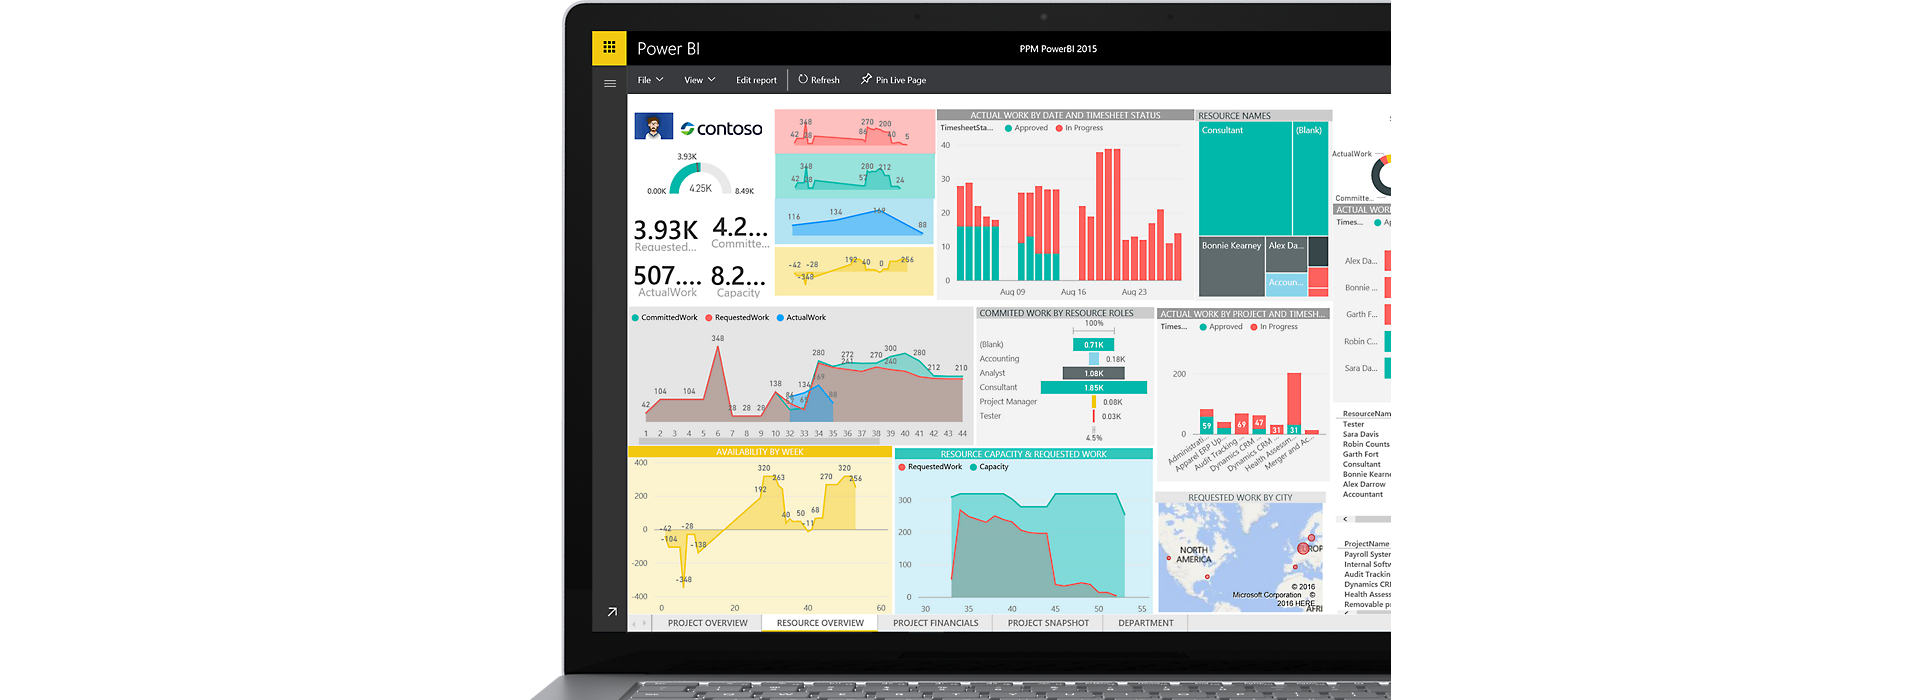 Device showing Power BI open with a series of data visualizations